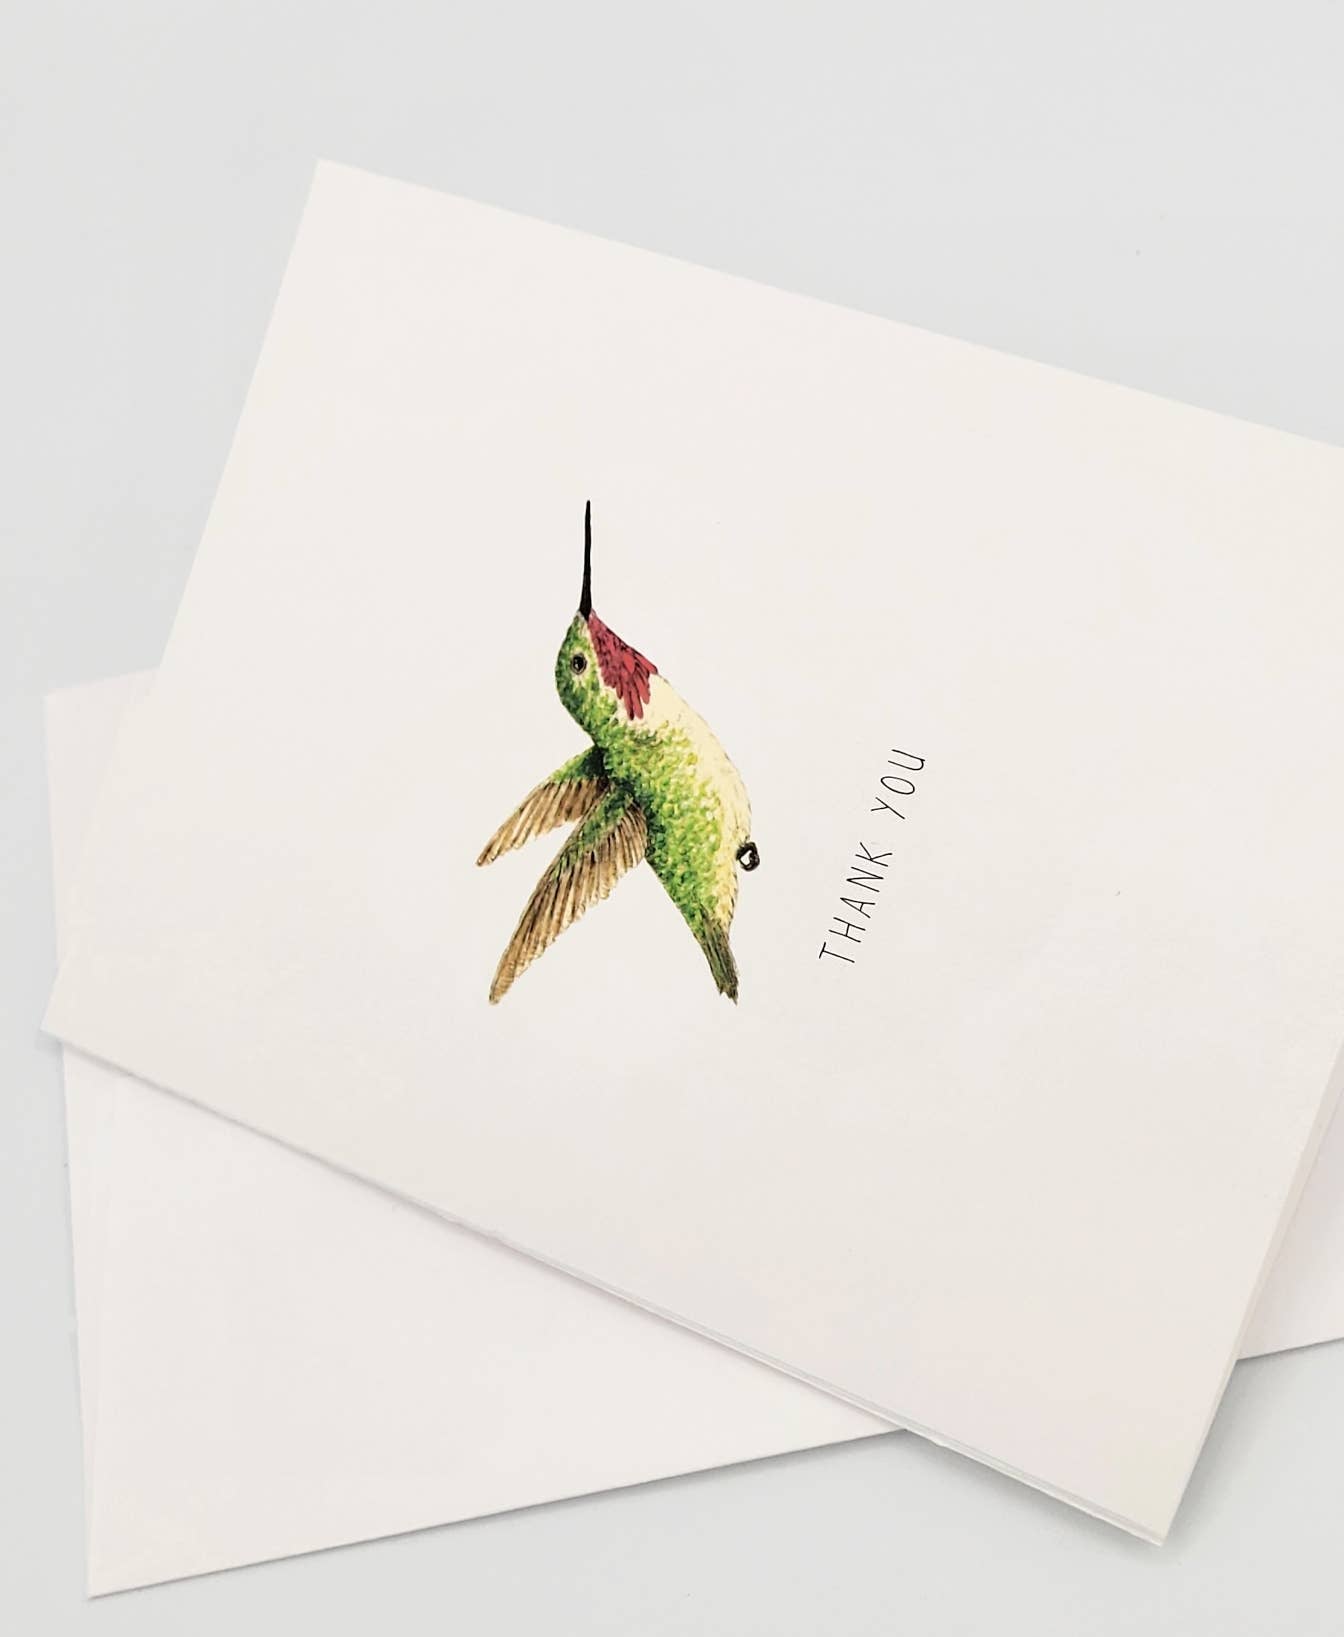 The Potting Shed - Greeting Card Expressions | Thank You Hummingbird